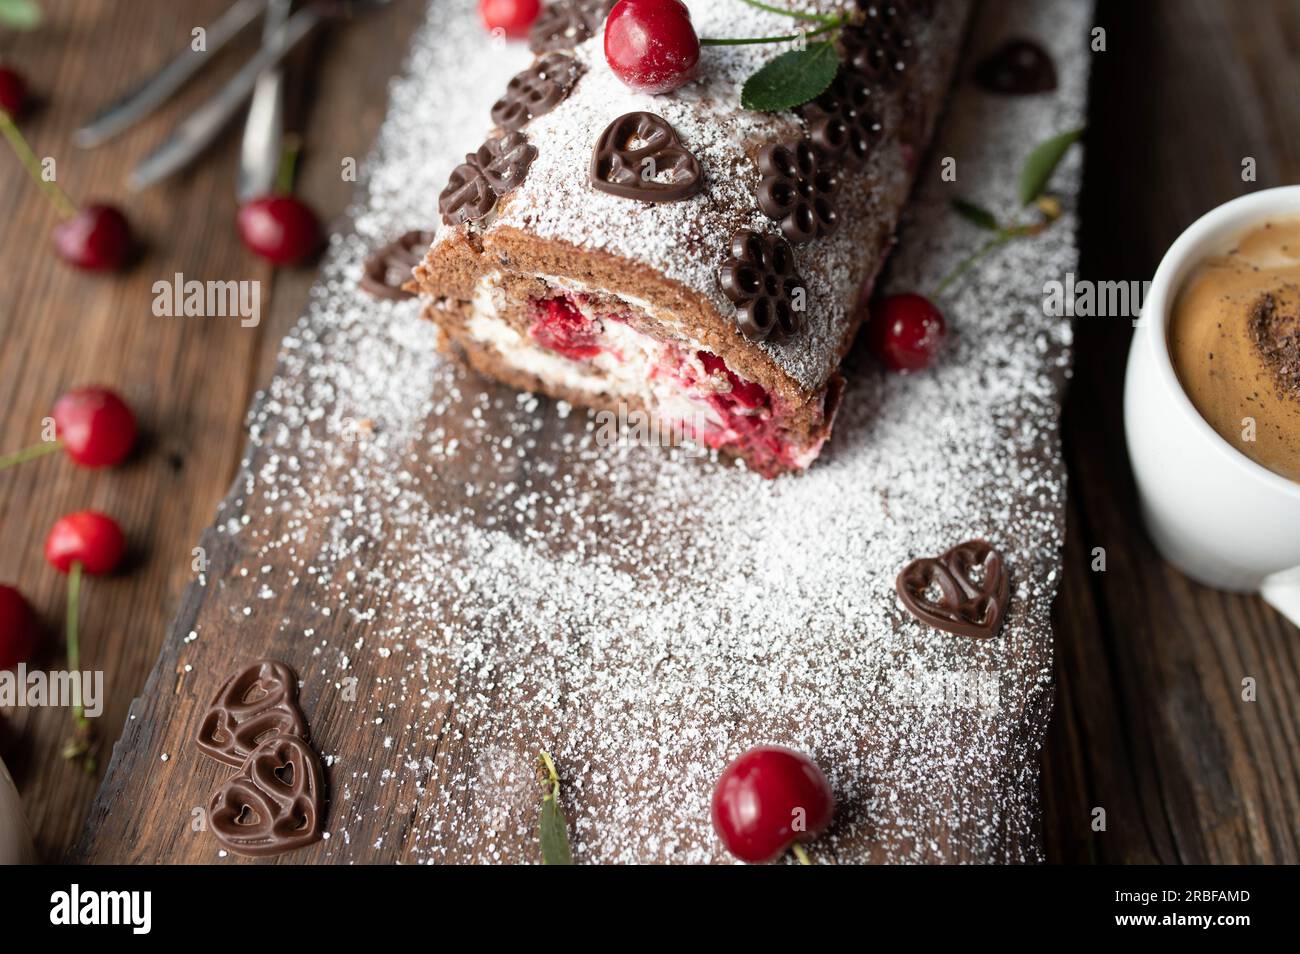 Swiss roll with cream and cherries on wooden background. Delicious chocolate cherry cake roulade Stock Photo